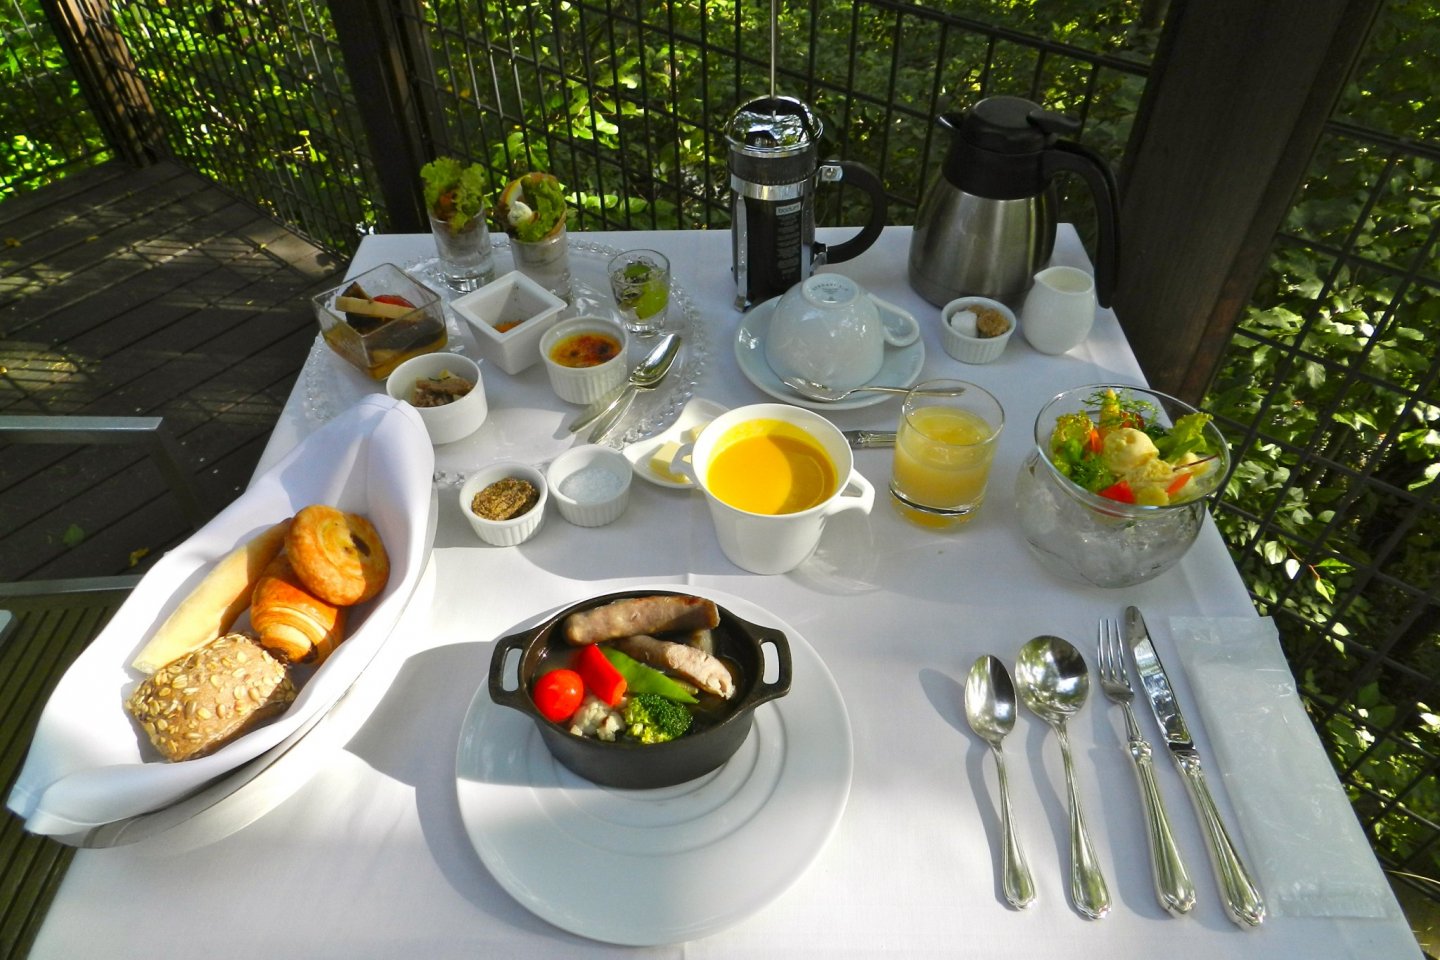 Breakfast on the private terrace. What a delightful way to start the day!